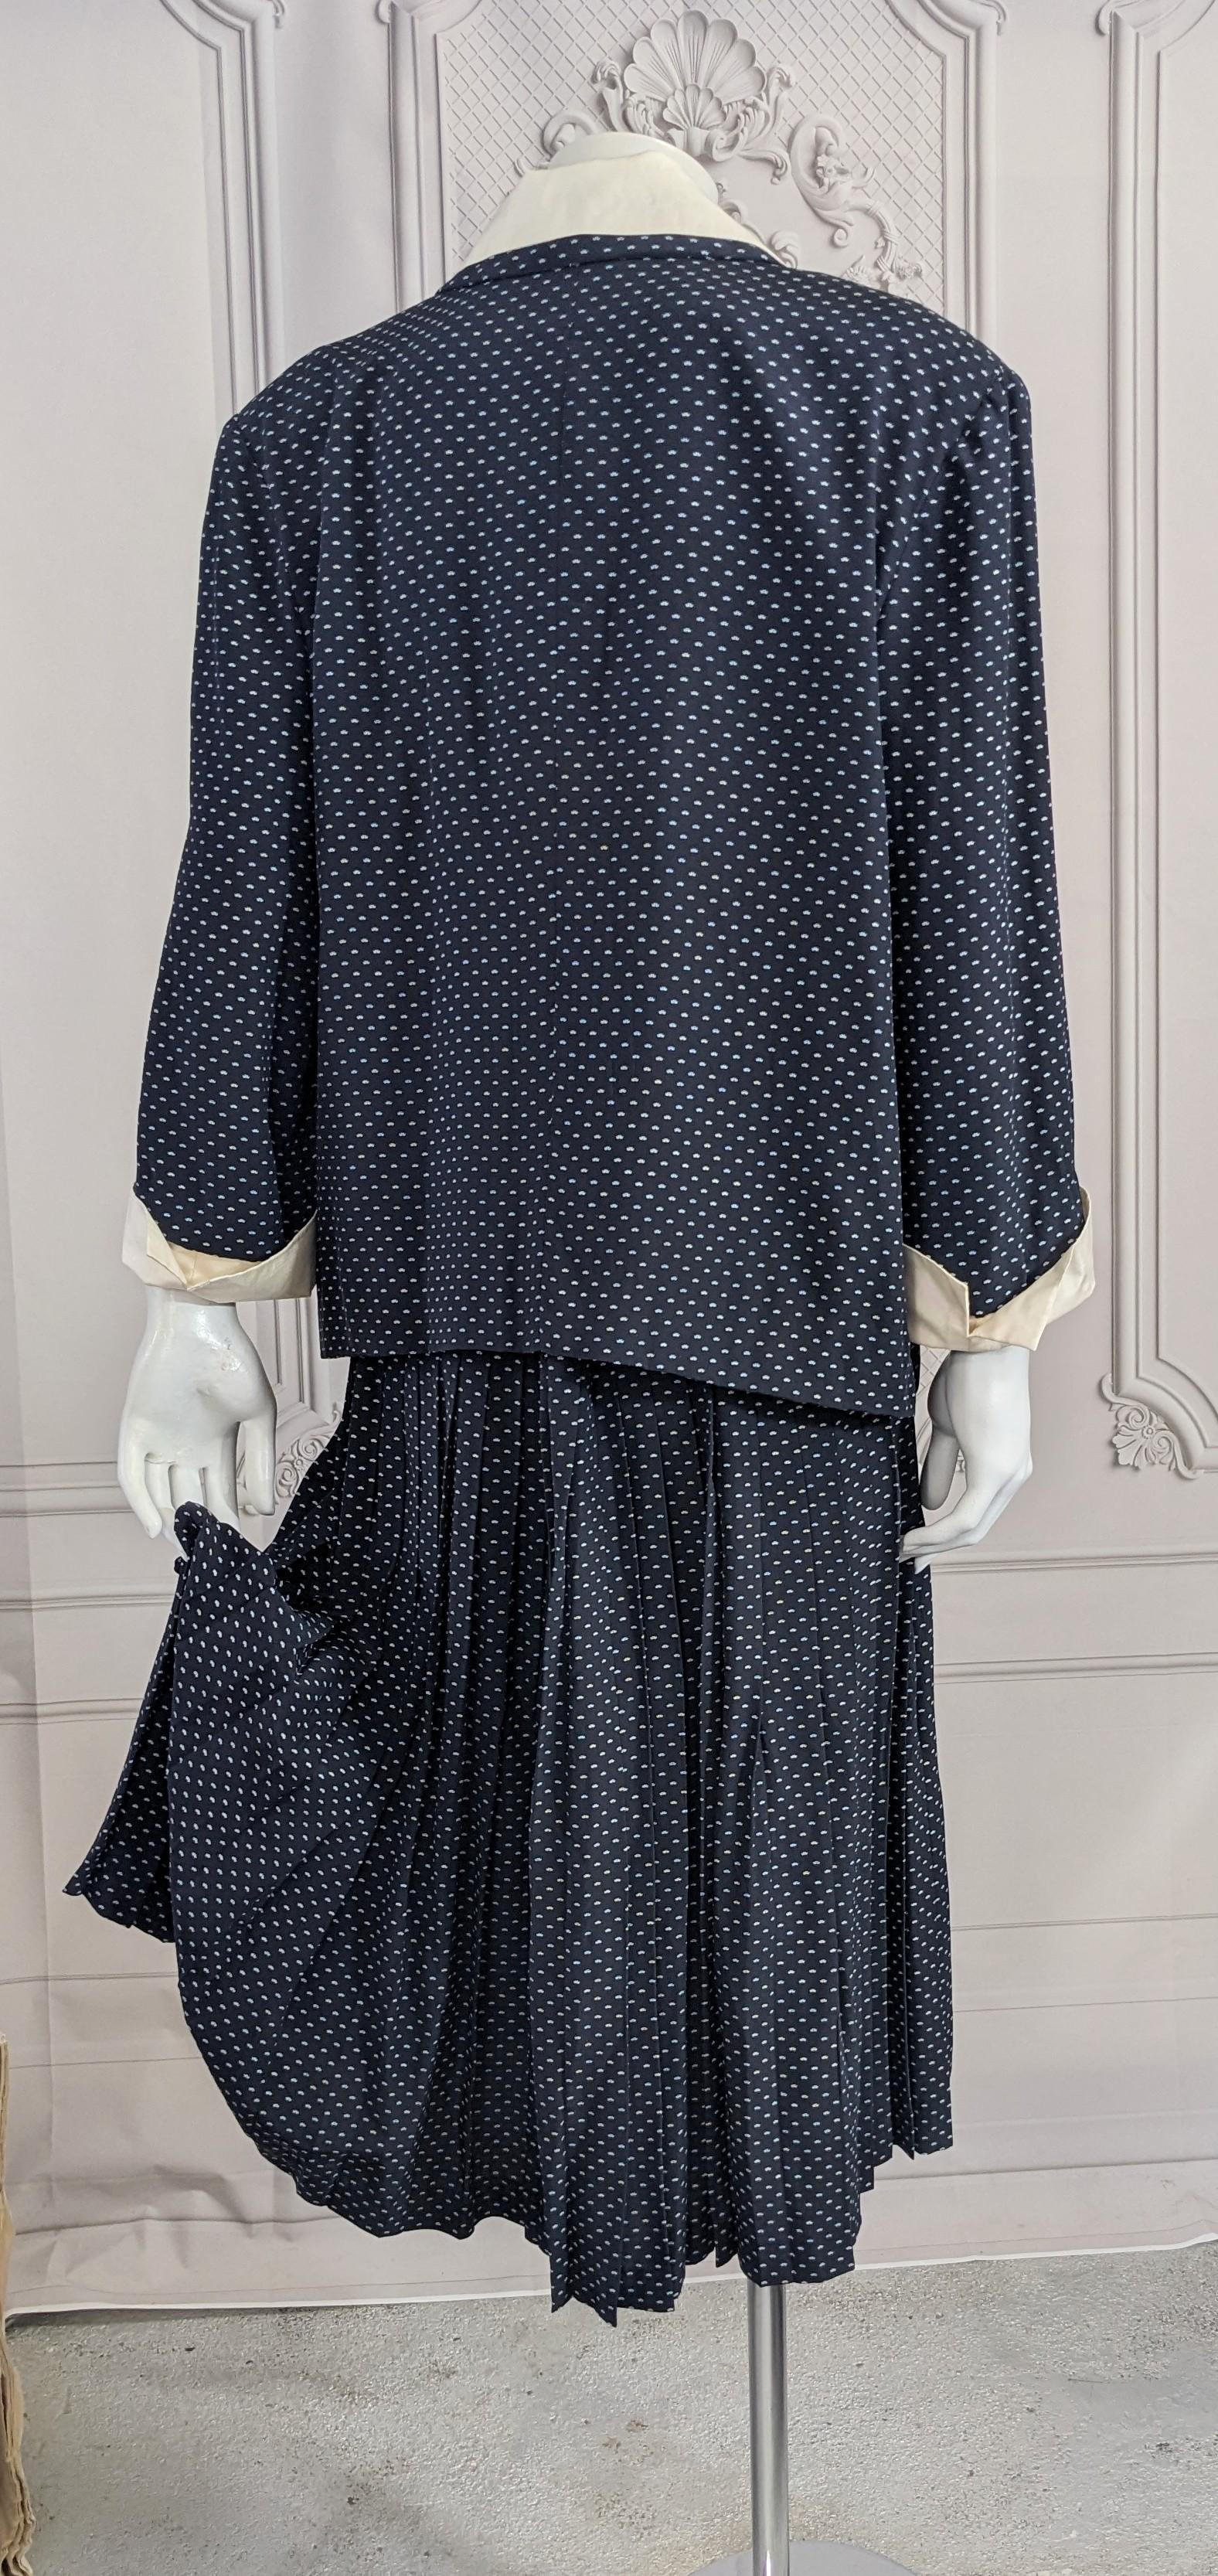 Chanel Navy Silk Crepe Skirt Suit In Good Condition For Sale In New York, NY